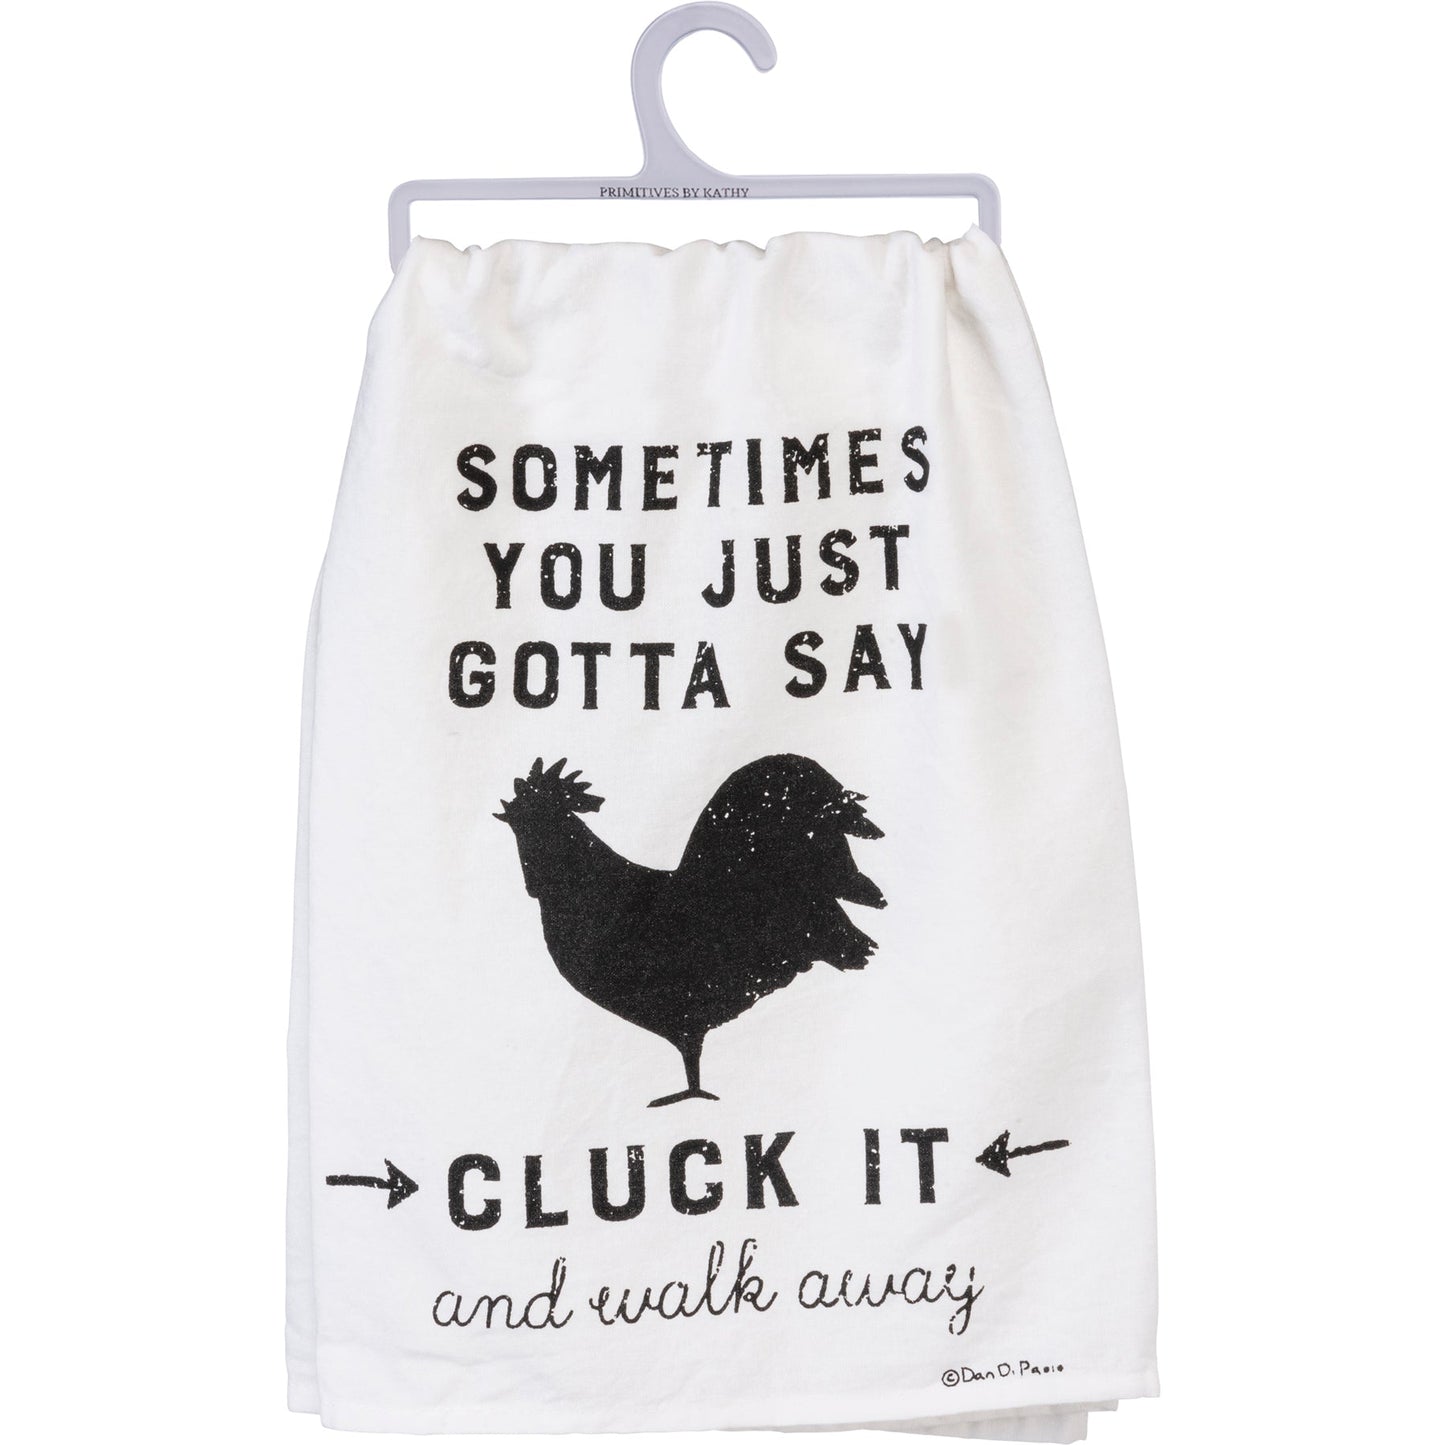 Sometimes You Just Gotta Say Cluck It Dish Cloth Towel | Novelty Silly Tea Towels | Cute Kitchen Hand Towel | Rooster | 28" Square